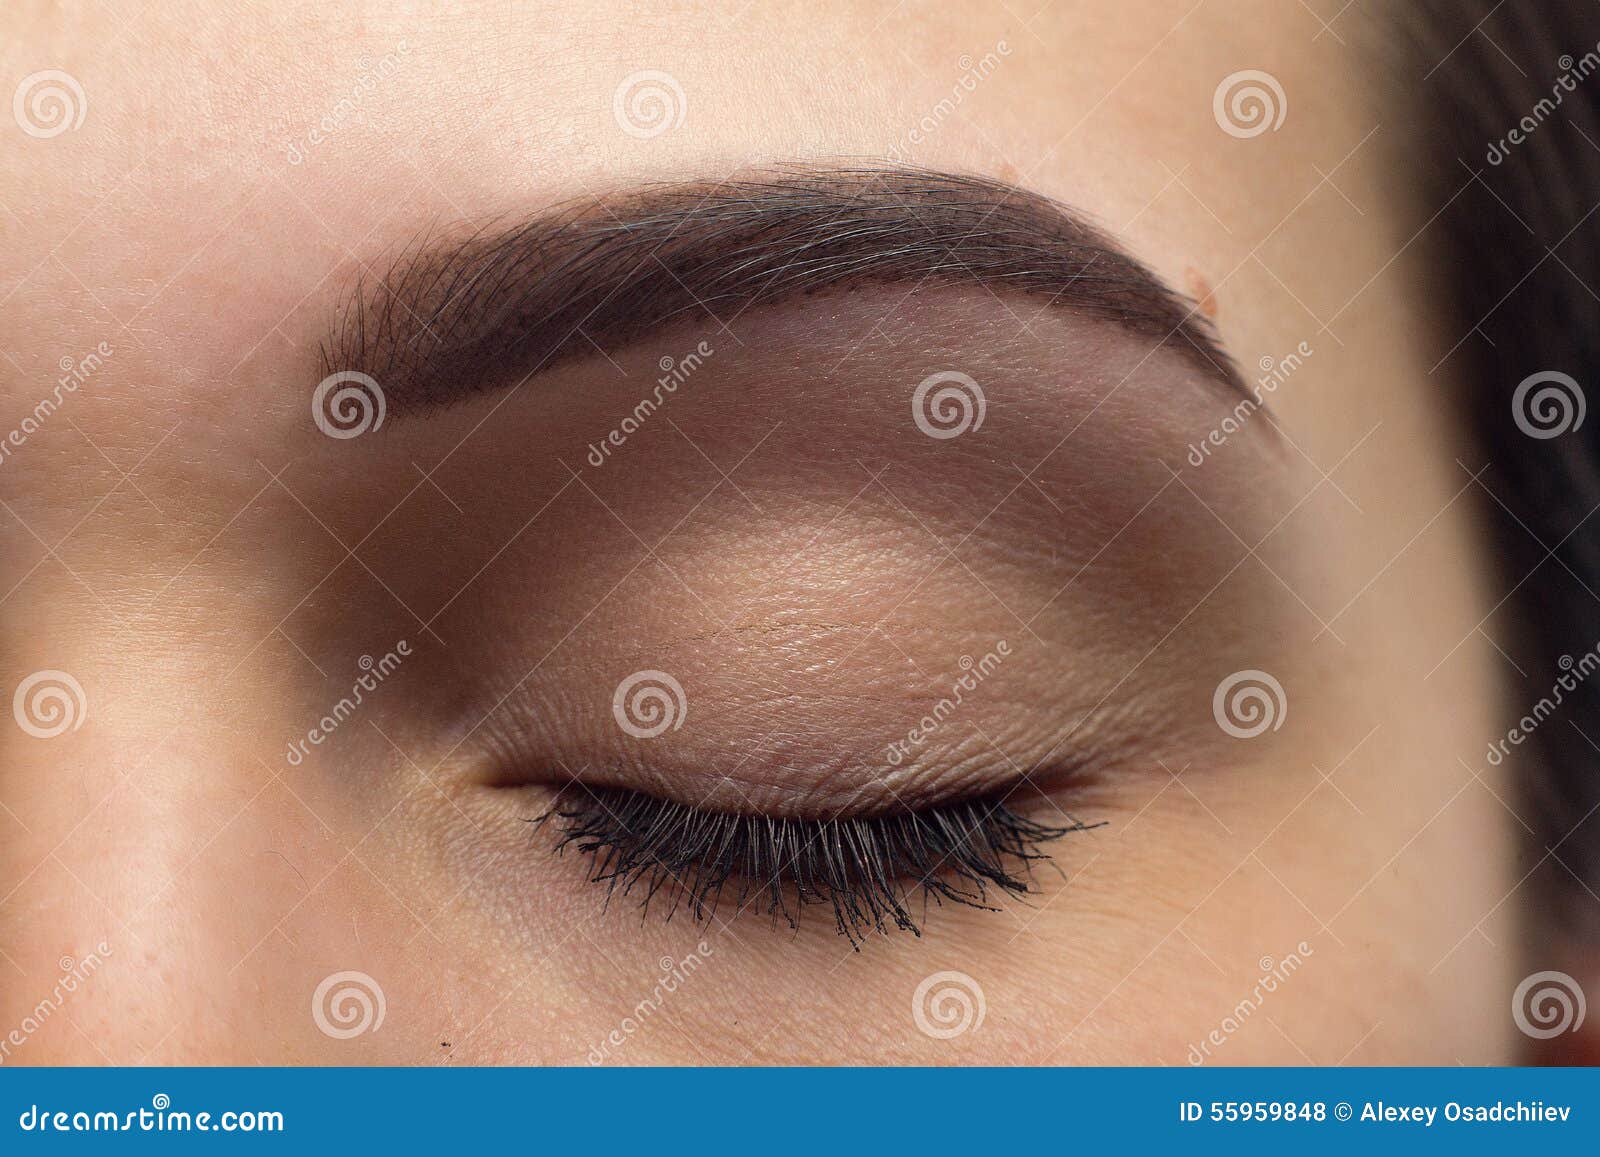 expressive significant eye perfect  of eyebrow